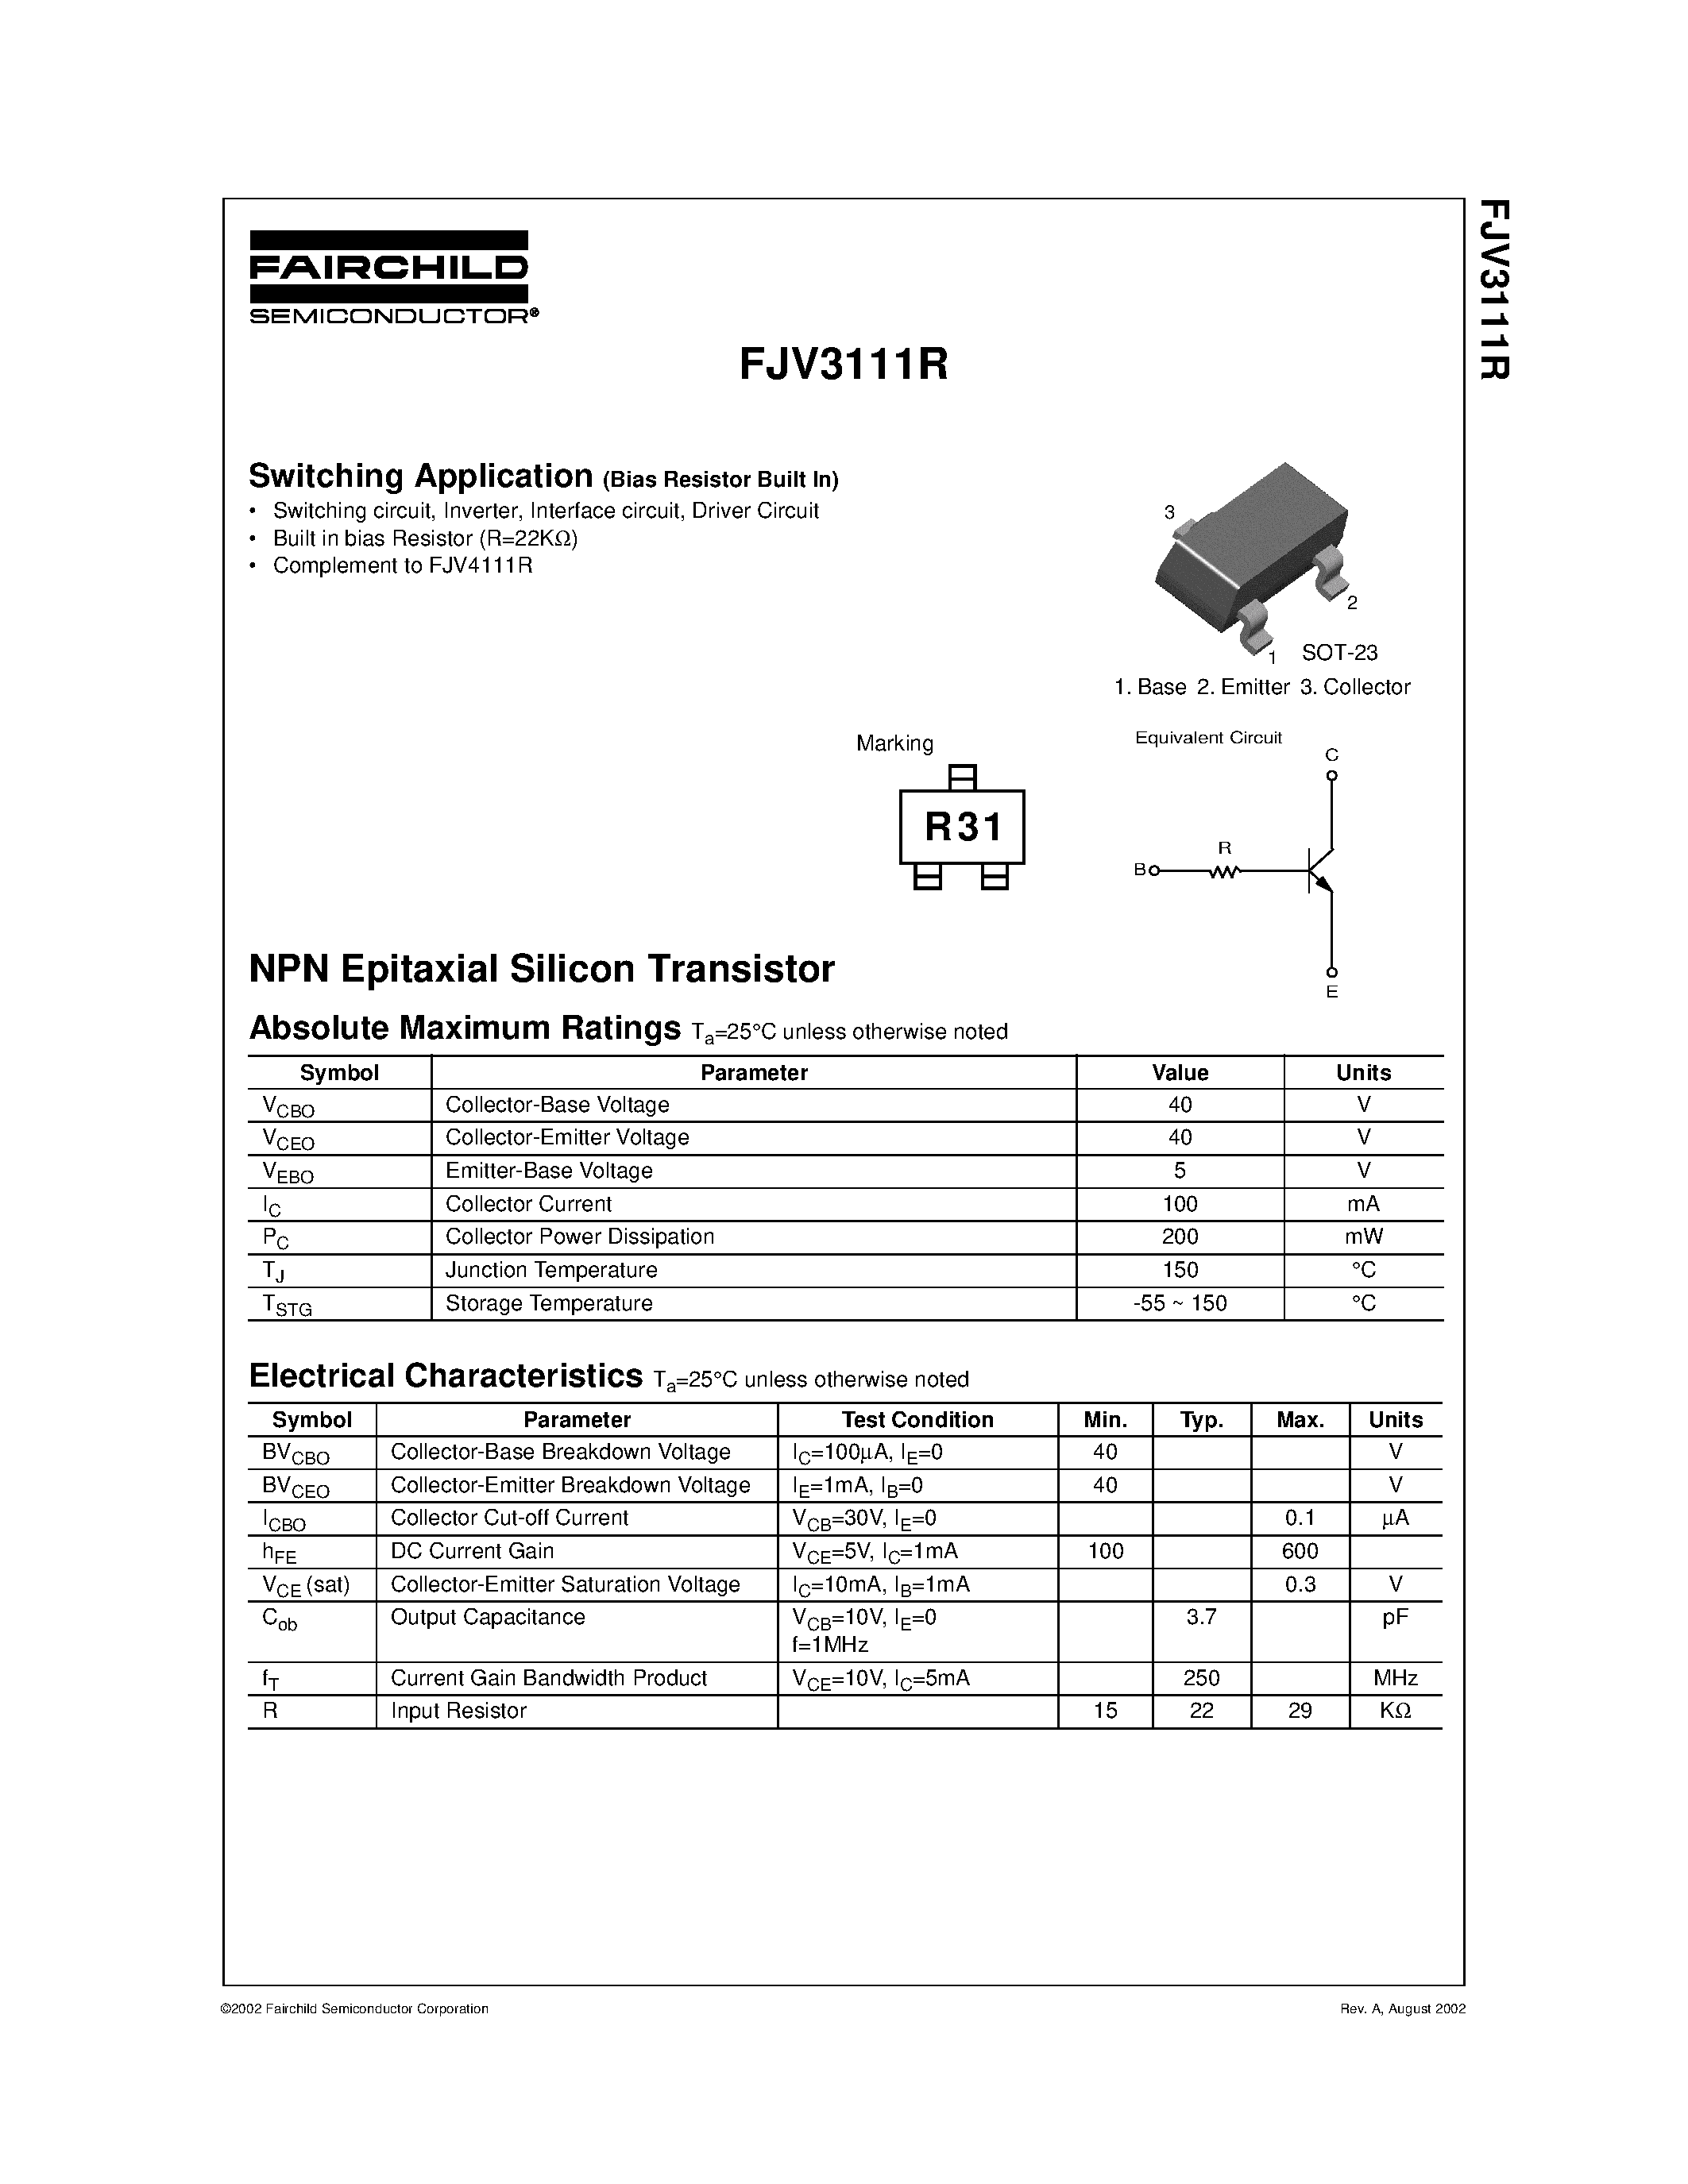 Datasheet FJV3111R - NPN Epitaxial Silicon Transistor page 1